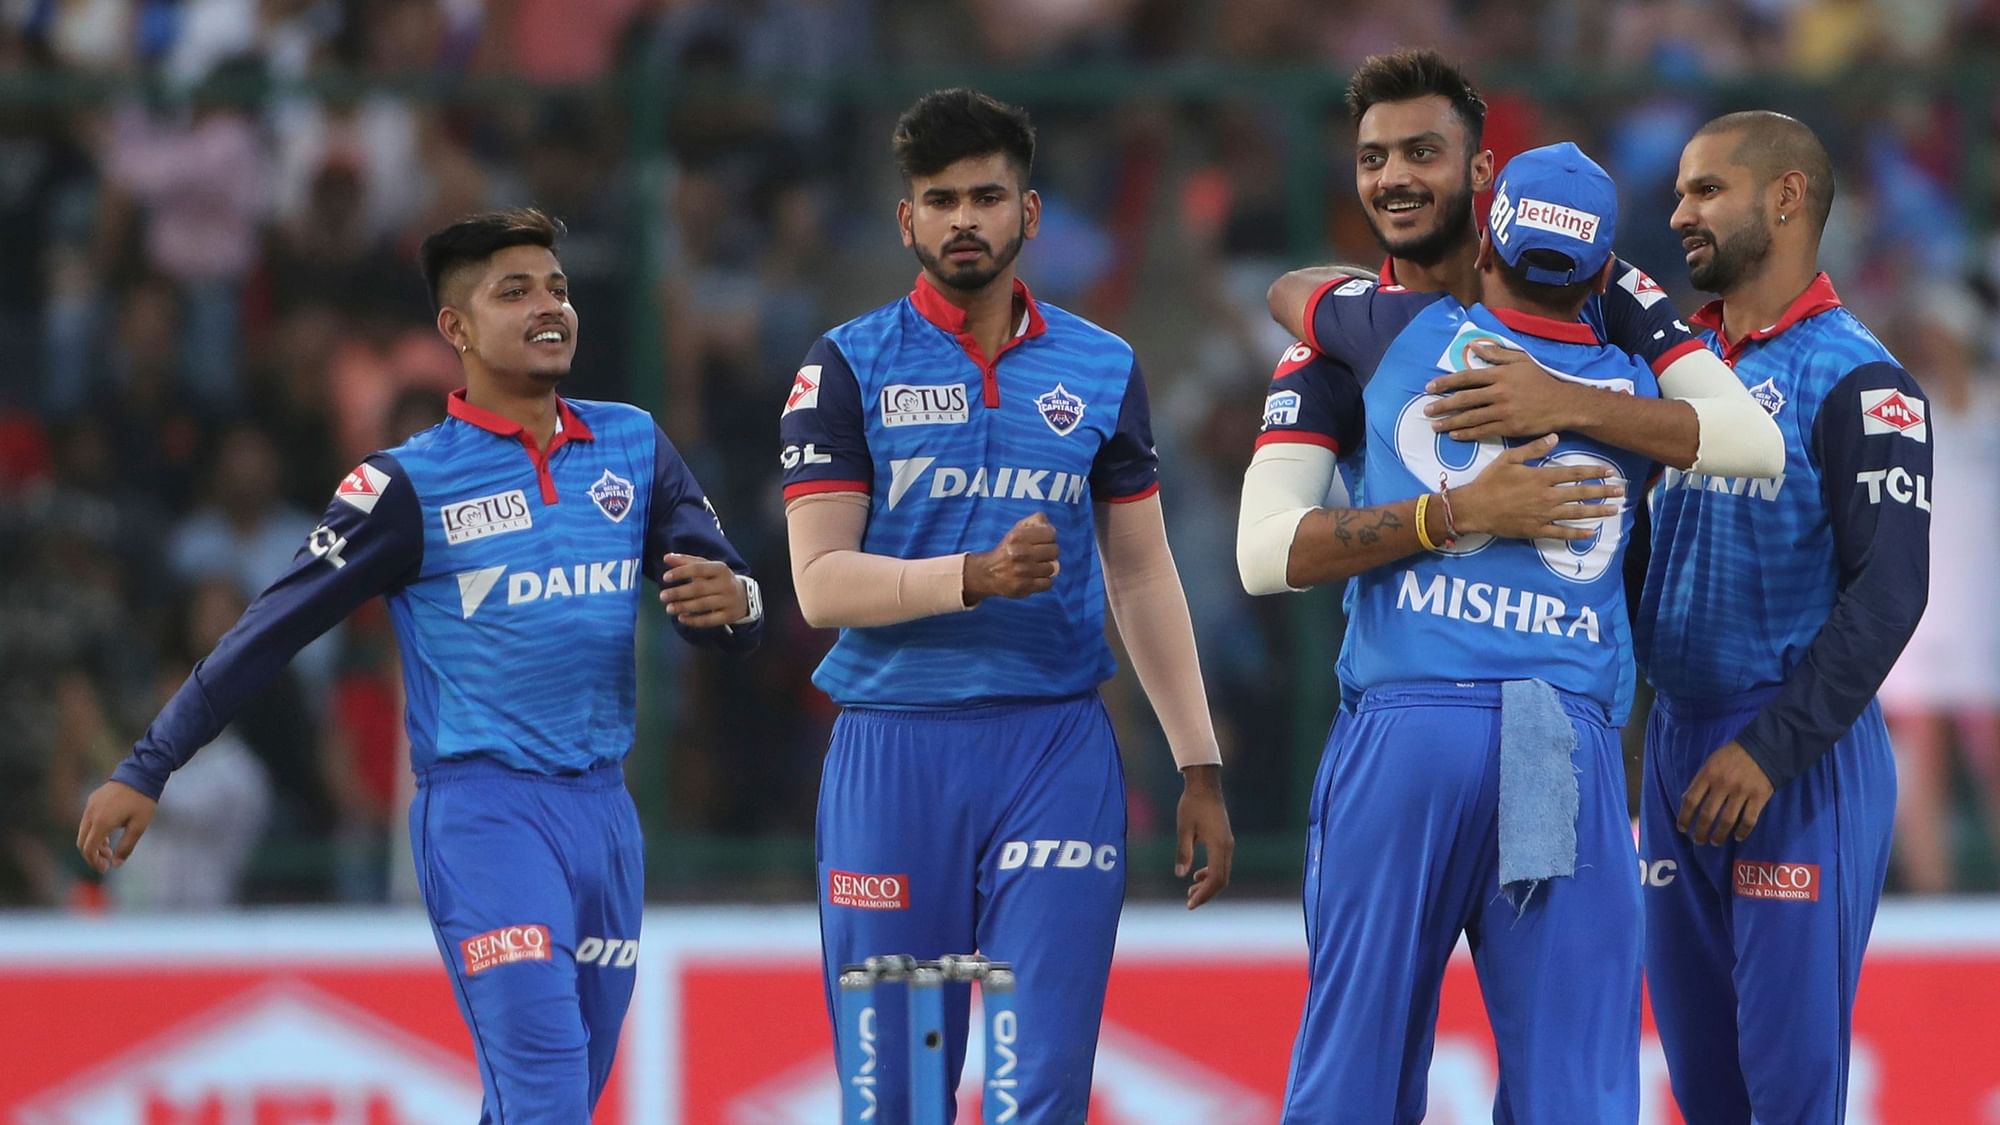 Delhi Capitals (DC) sealed their place in the playoffs after registering a comprehensive 16-run victory over RCB.